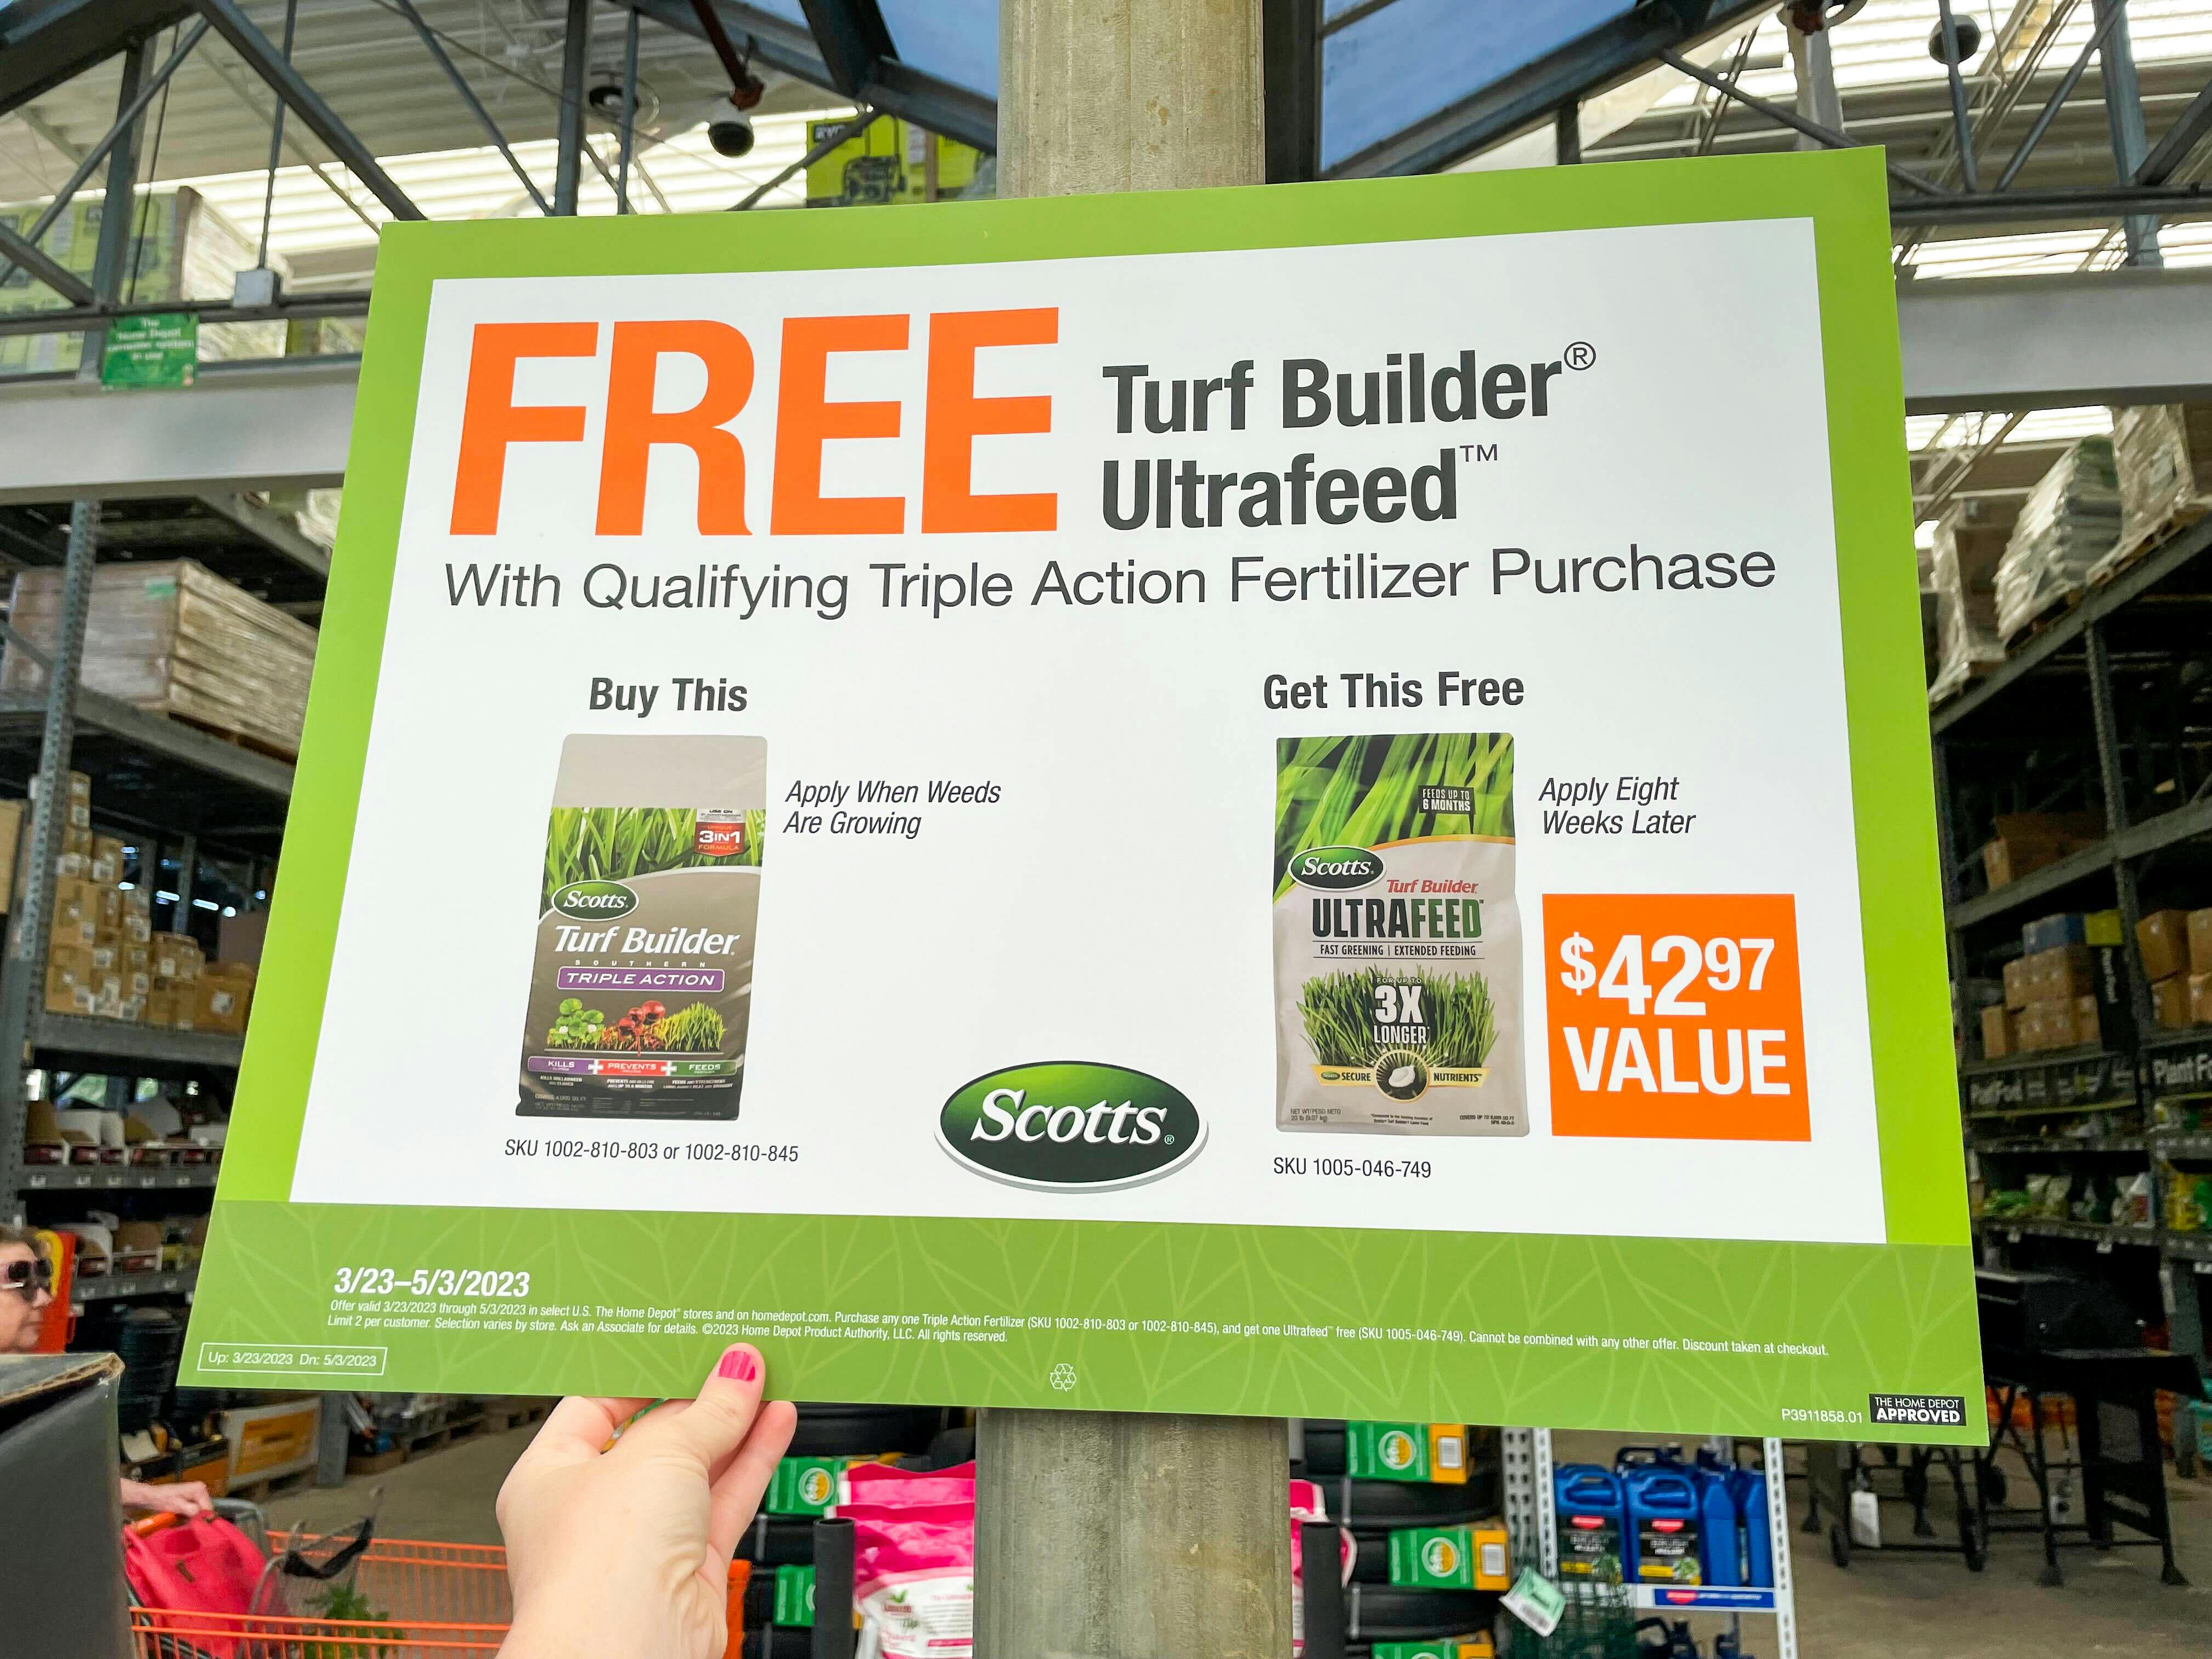 A sign that promotes a FREE turf builder ultrafeed with a qualifying triple action fertilizer purchase at the Home Depot